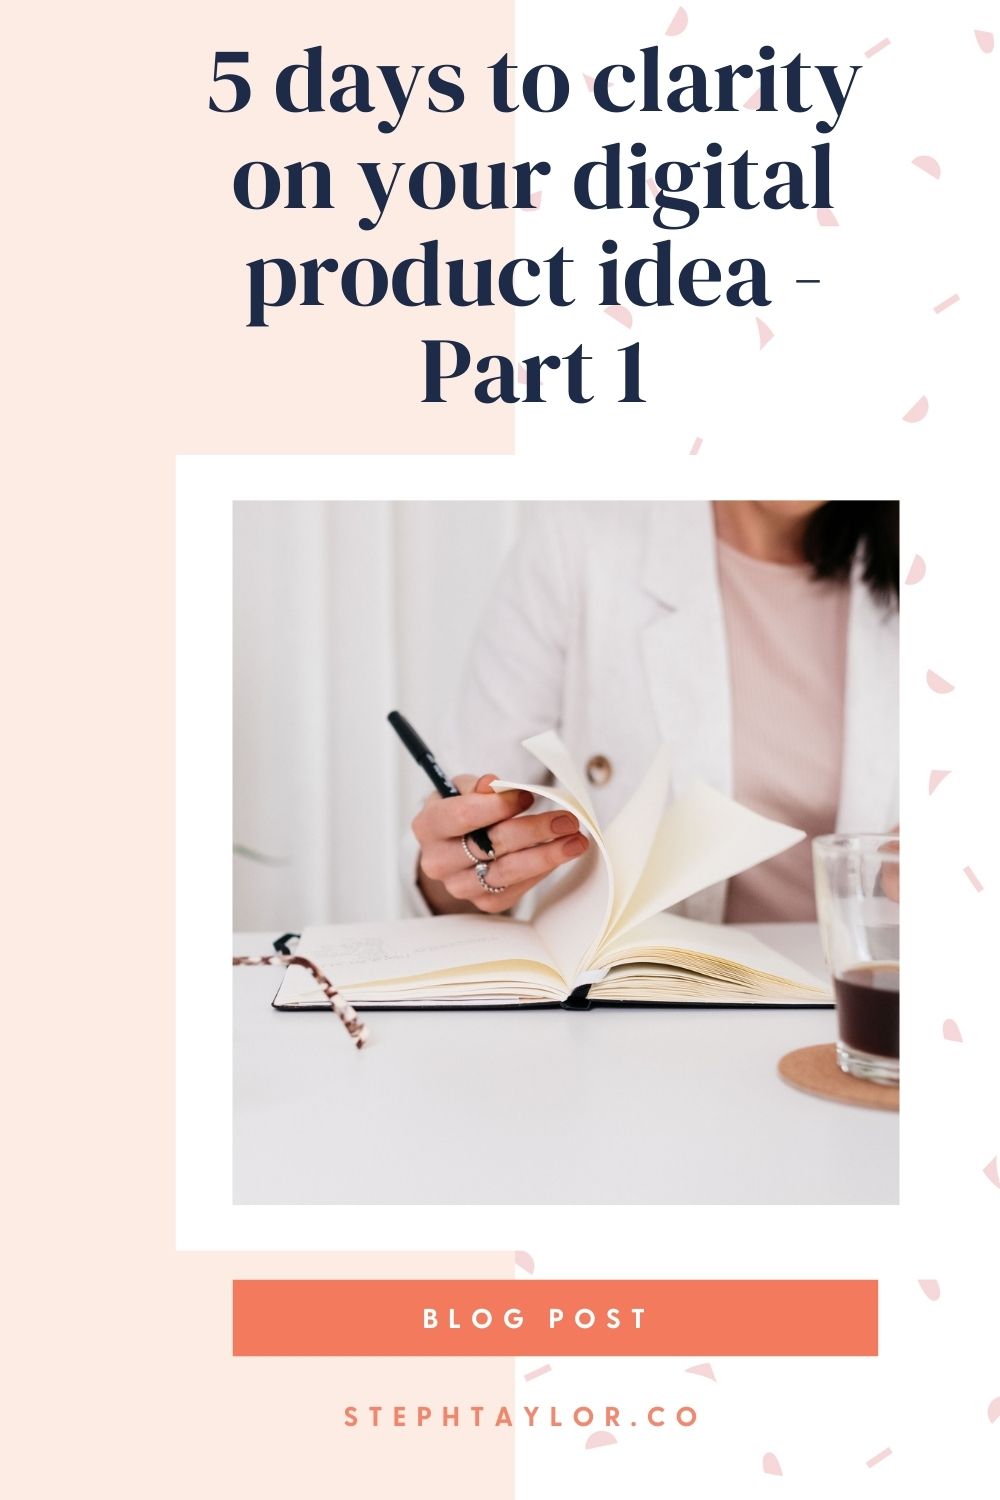 5 days to clarity on your digital product idea - Part 1